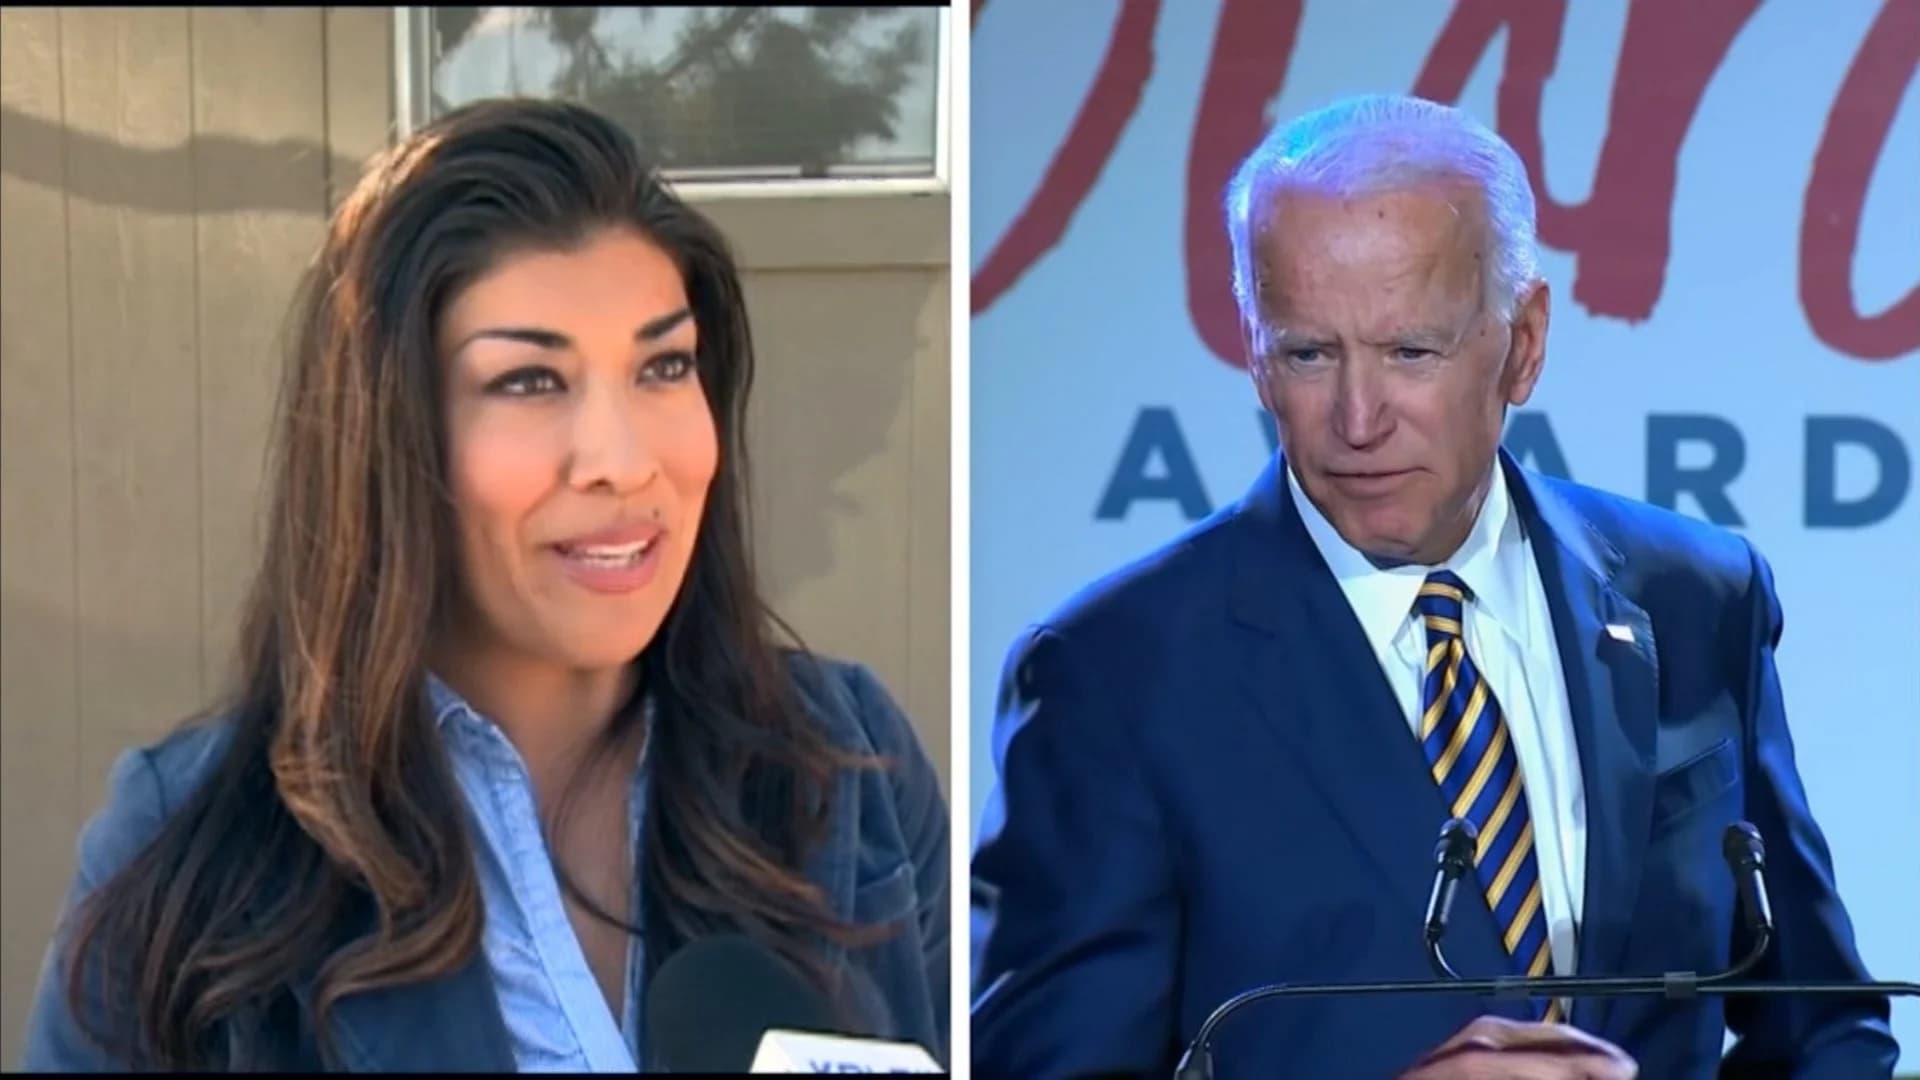 Former politician claims Joe Biden kissed the back of her head years ago at campaign event